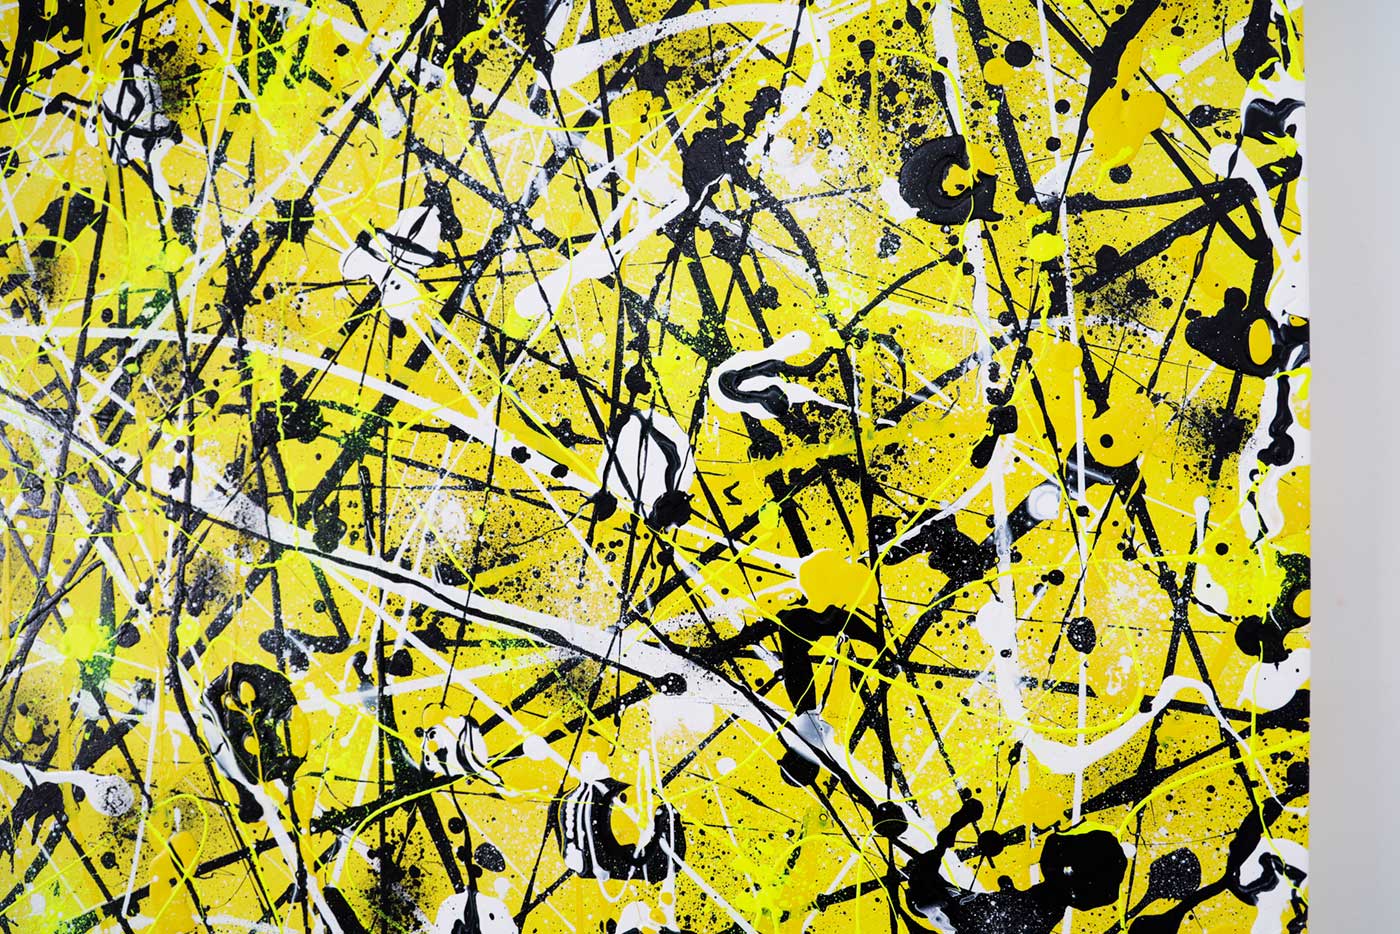 Beehive, original abstract expressionism painting texture up close. Action painting in yellow, neon yellow, white and black. Painted by Bridget Bradley 